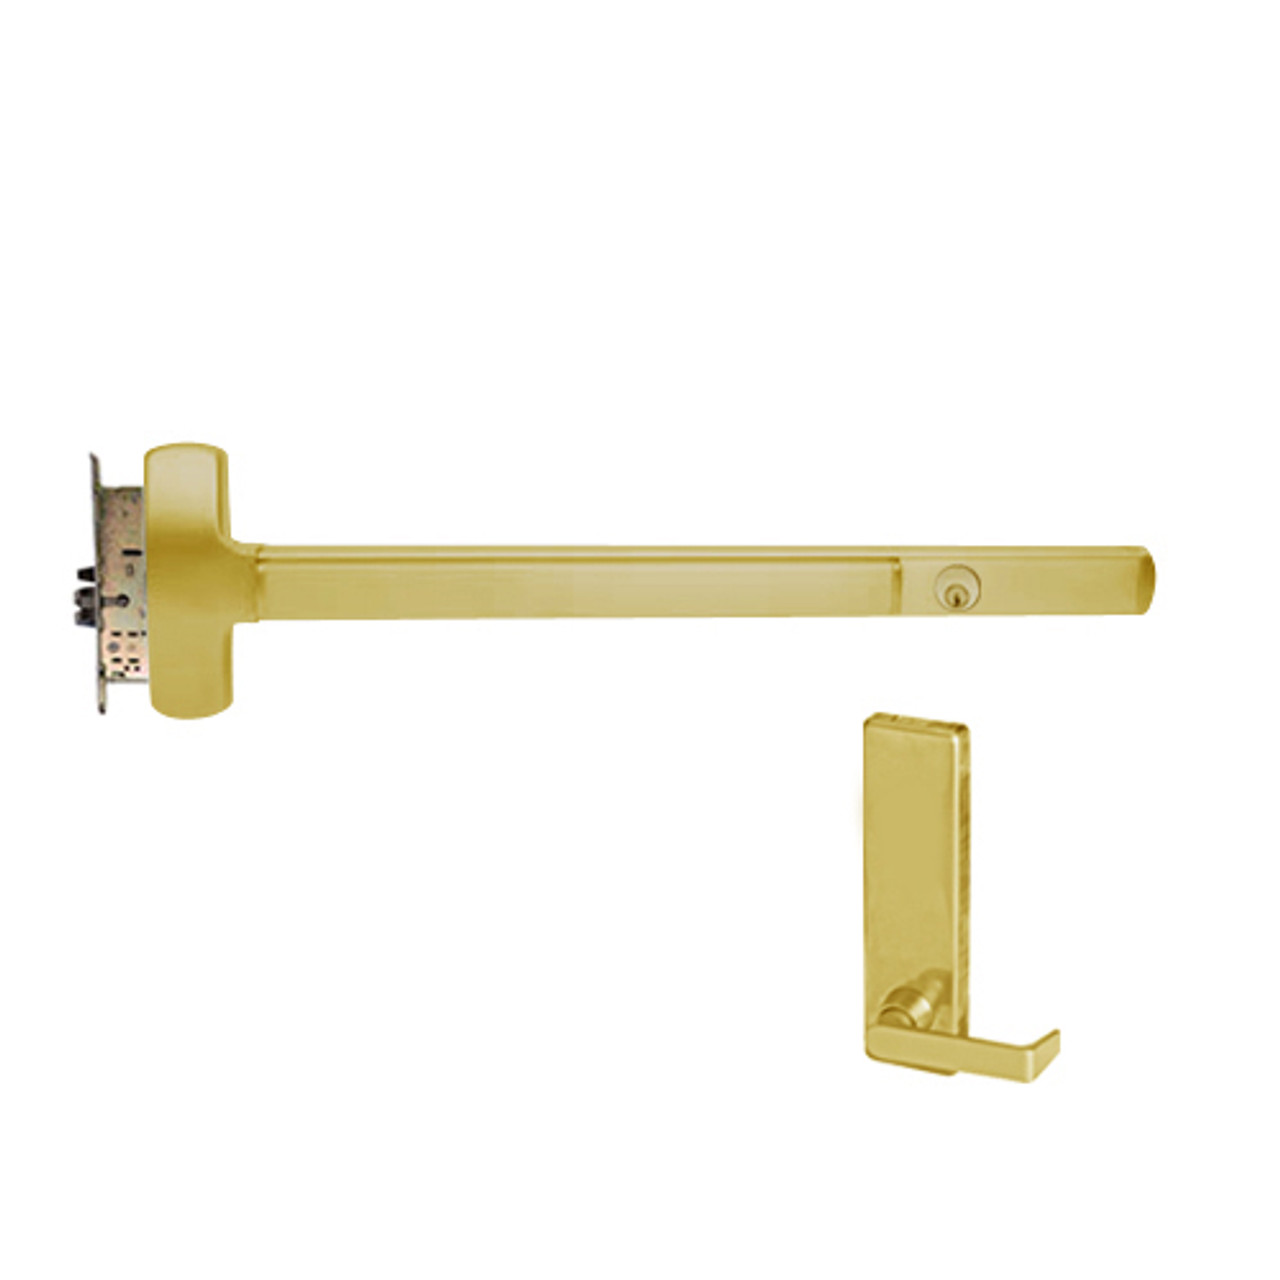 CD25-M-L-BE-DANE-US3-4-RHR Falcon Exit Device in Polished Brass